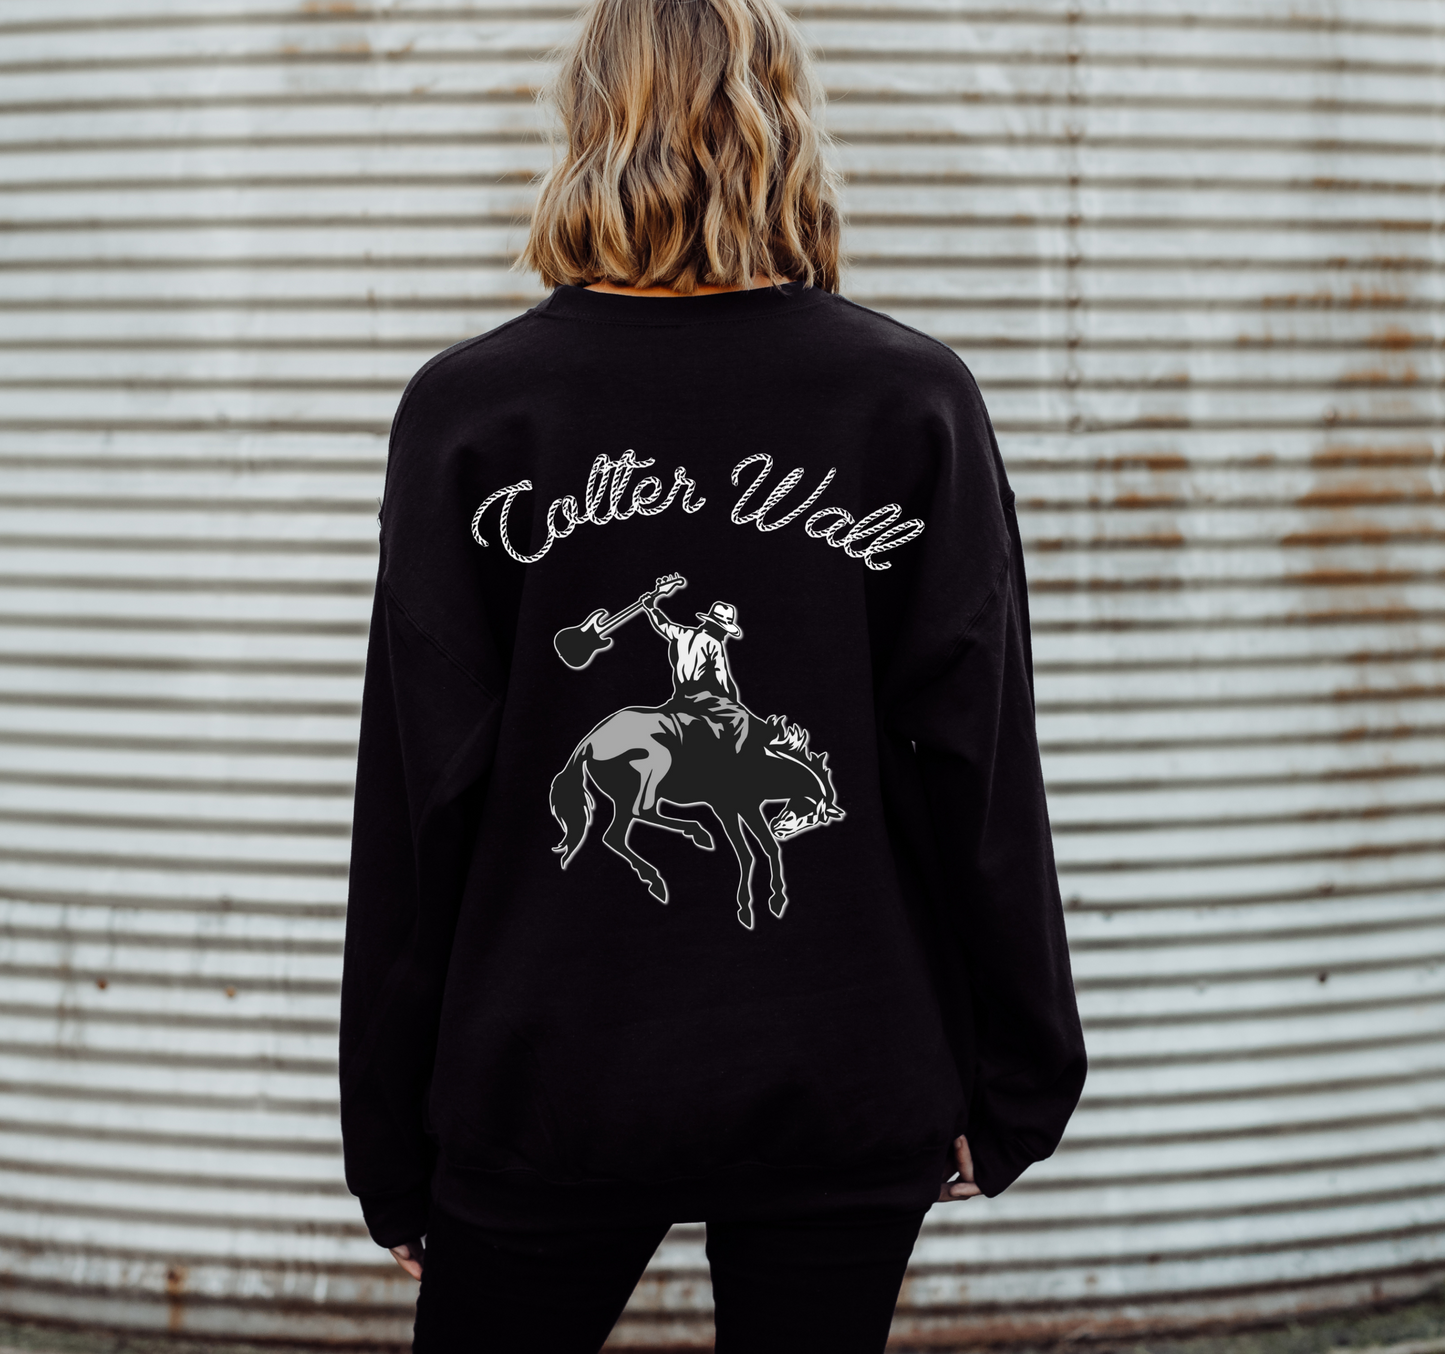 Colter Wall Rodeo Sweatshirt